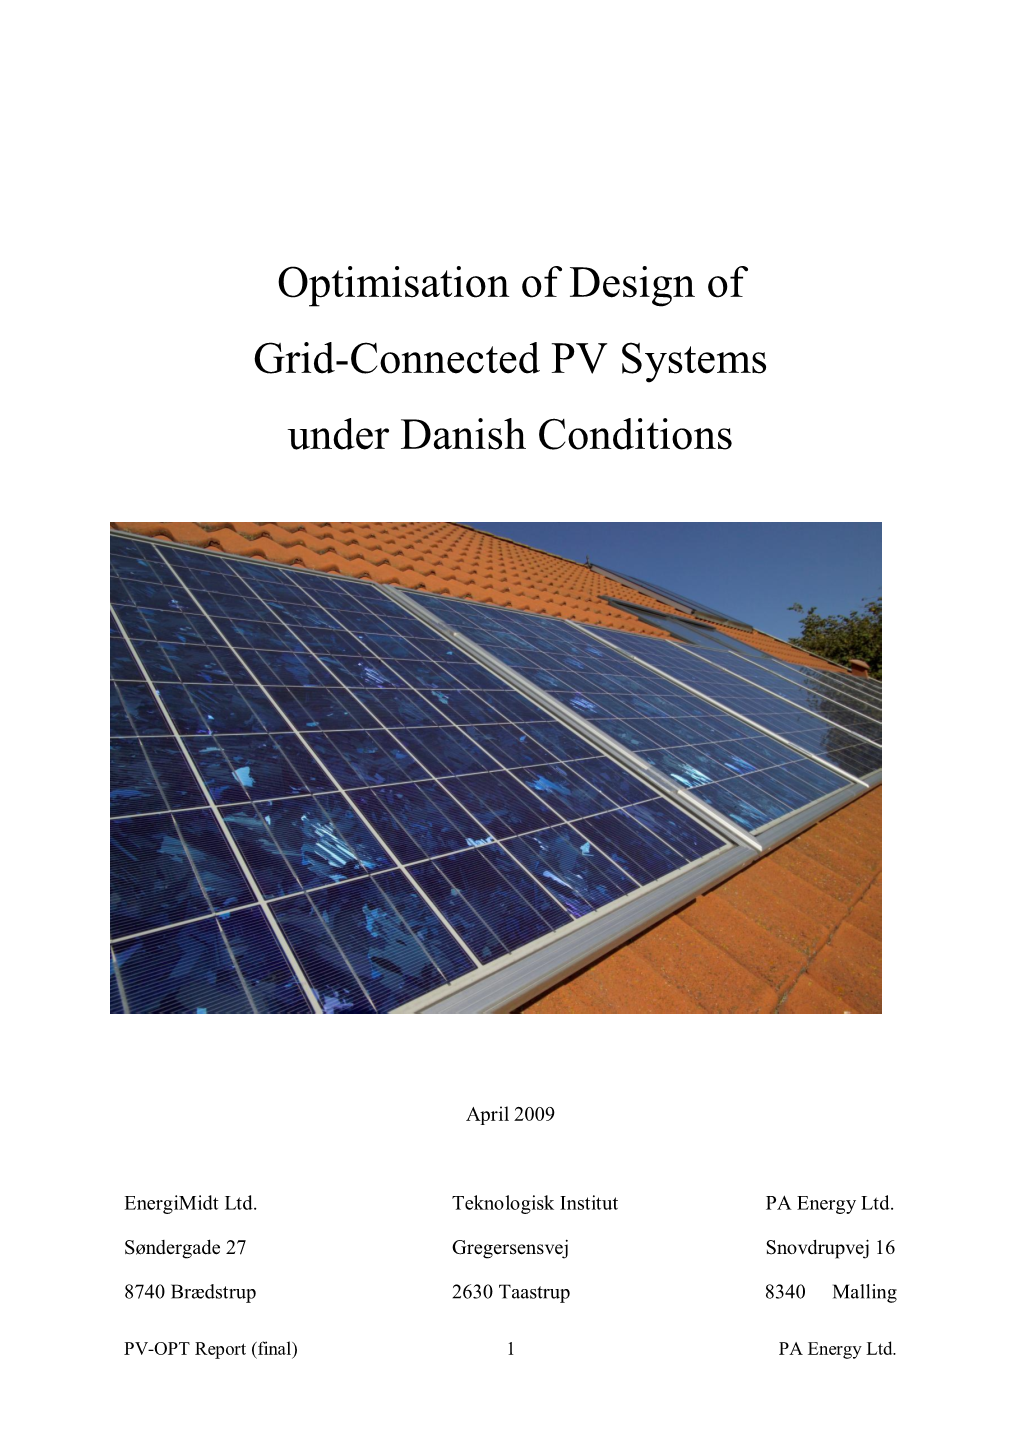 Optimisation of Design of Grid-Connected PV Systems Under Danish Conditions